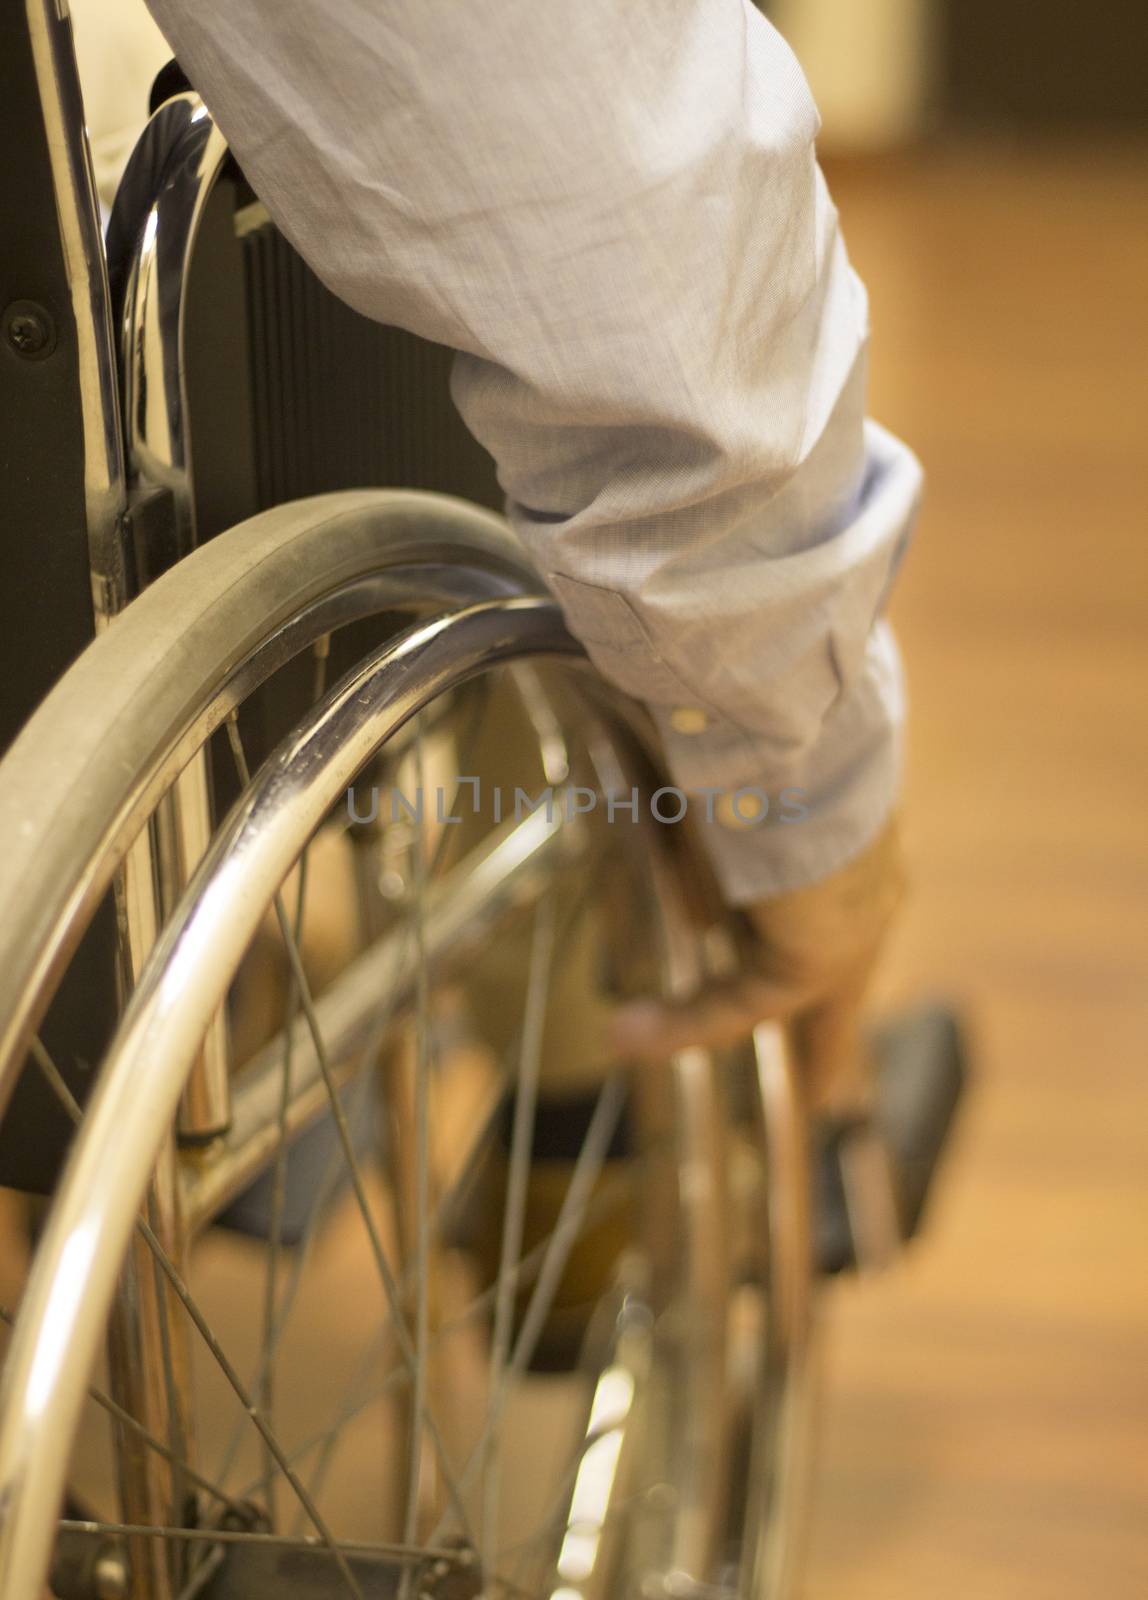 Man in wheel chair in hospital clinic closeup on wheel by edwardolive